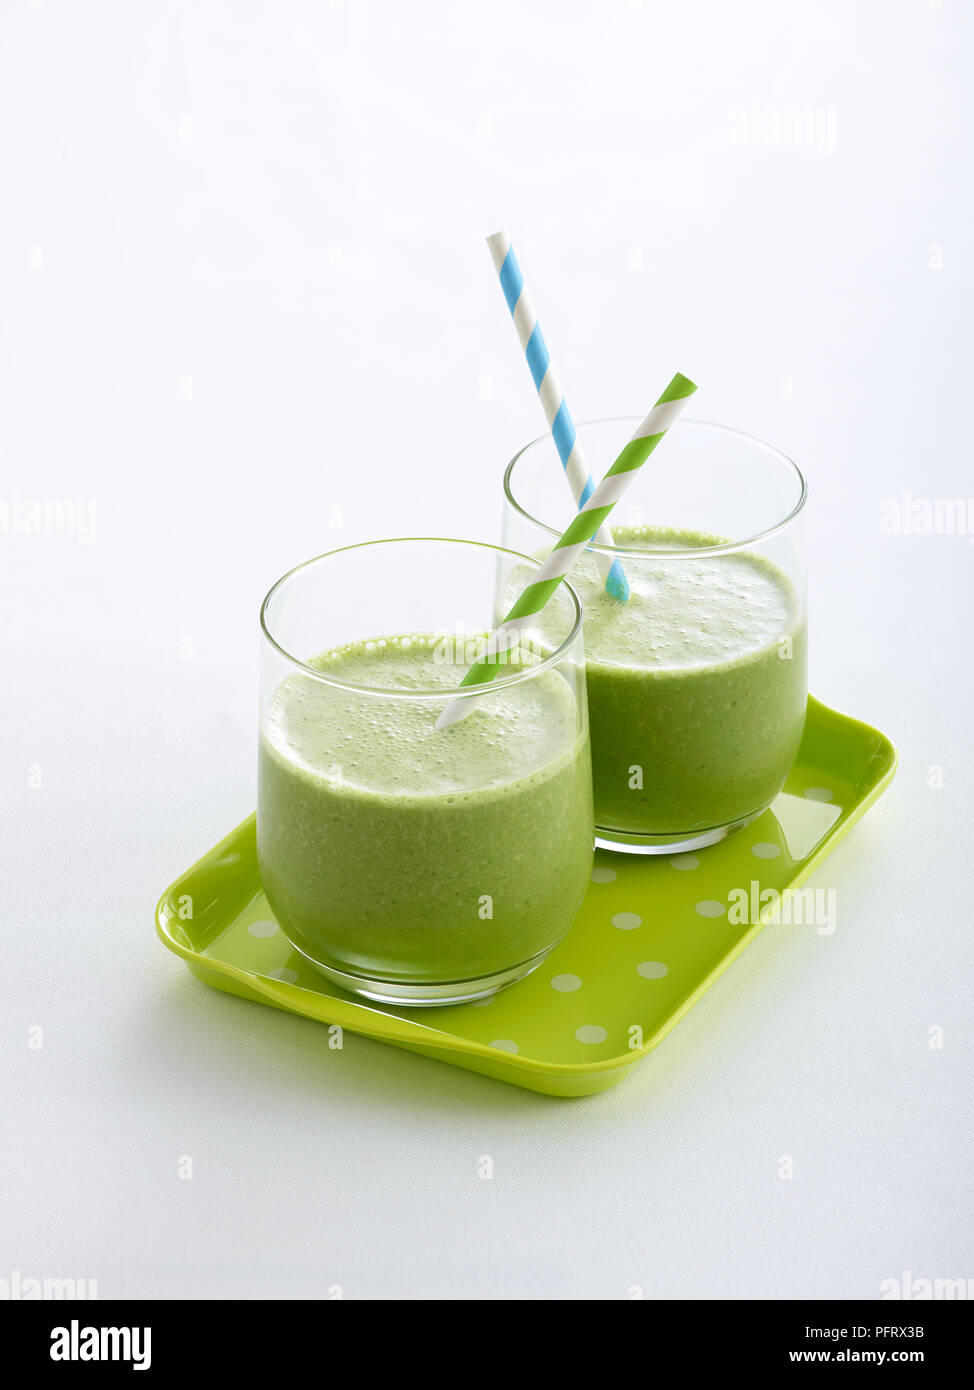 Two glasses filled with a green smoothies, served on a grey tray Stock Photo